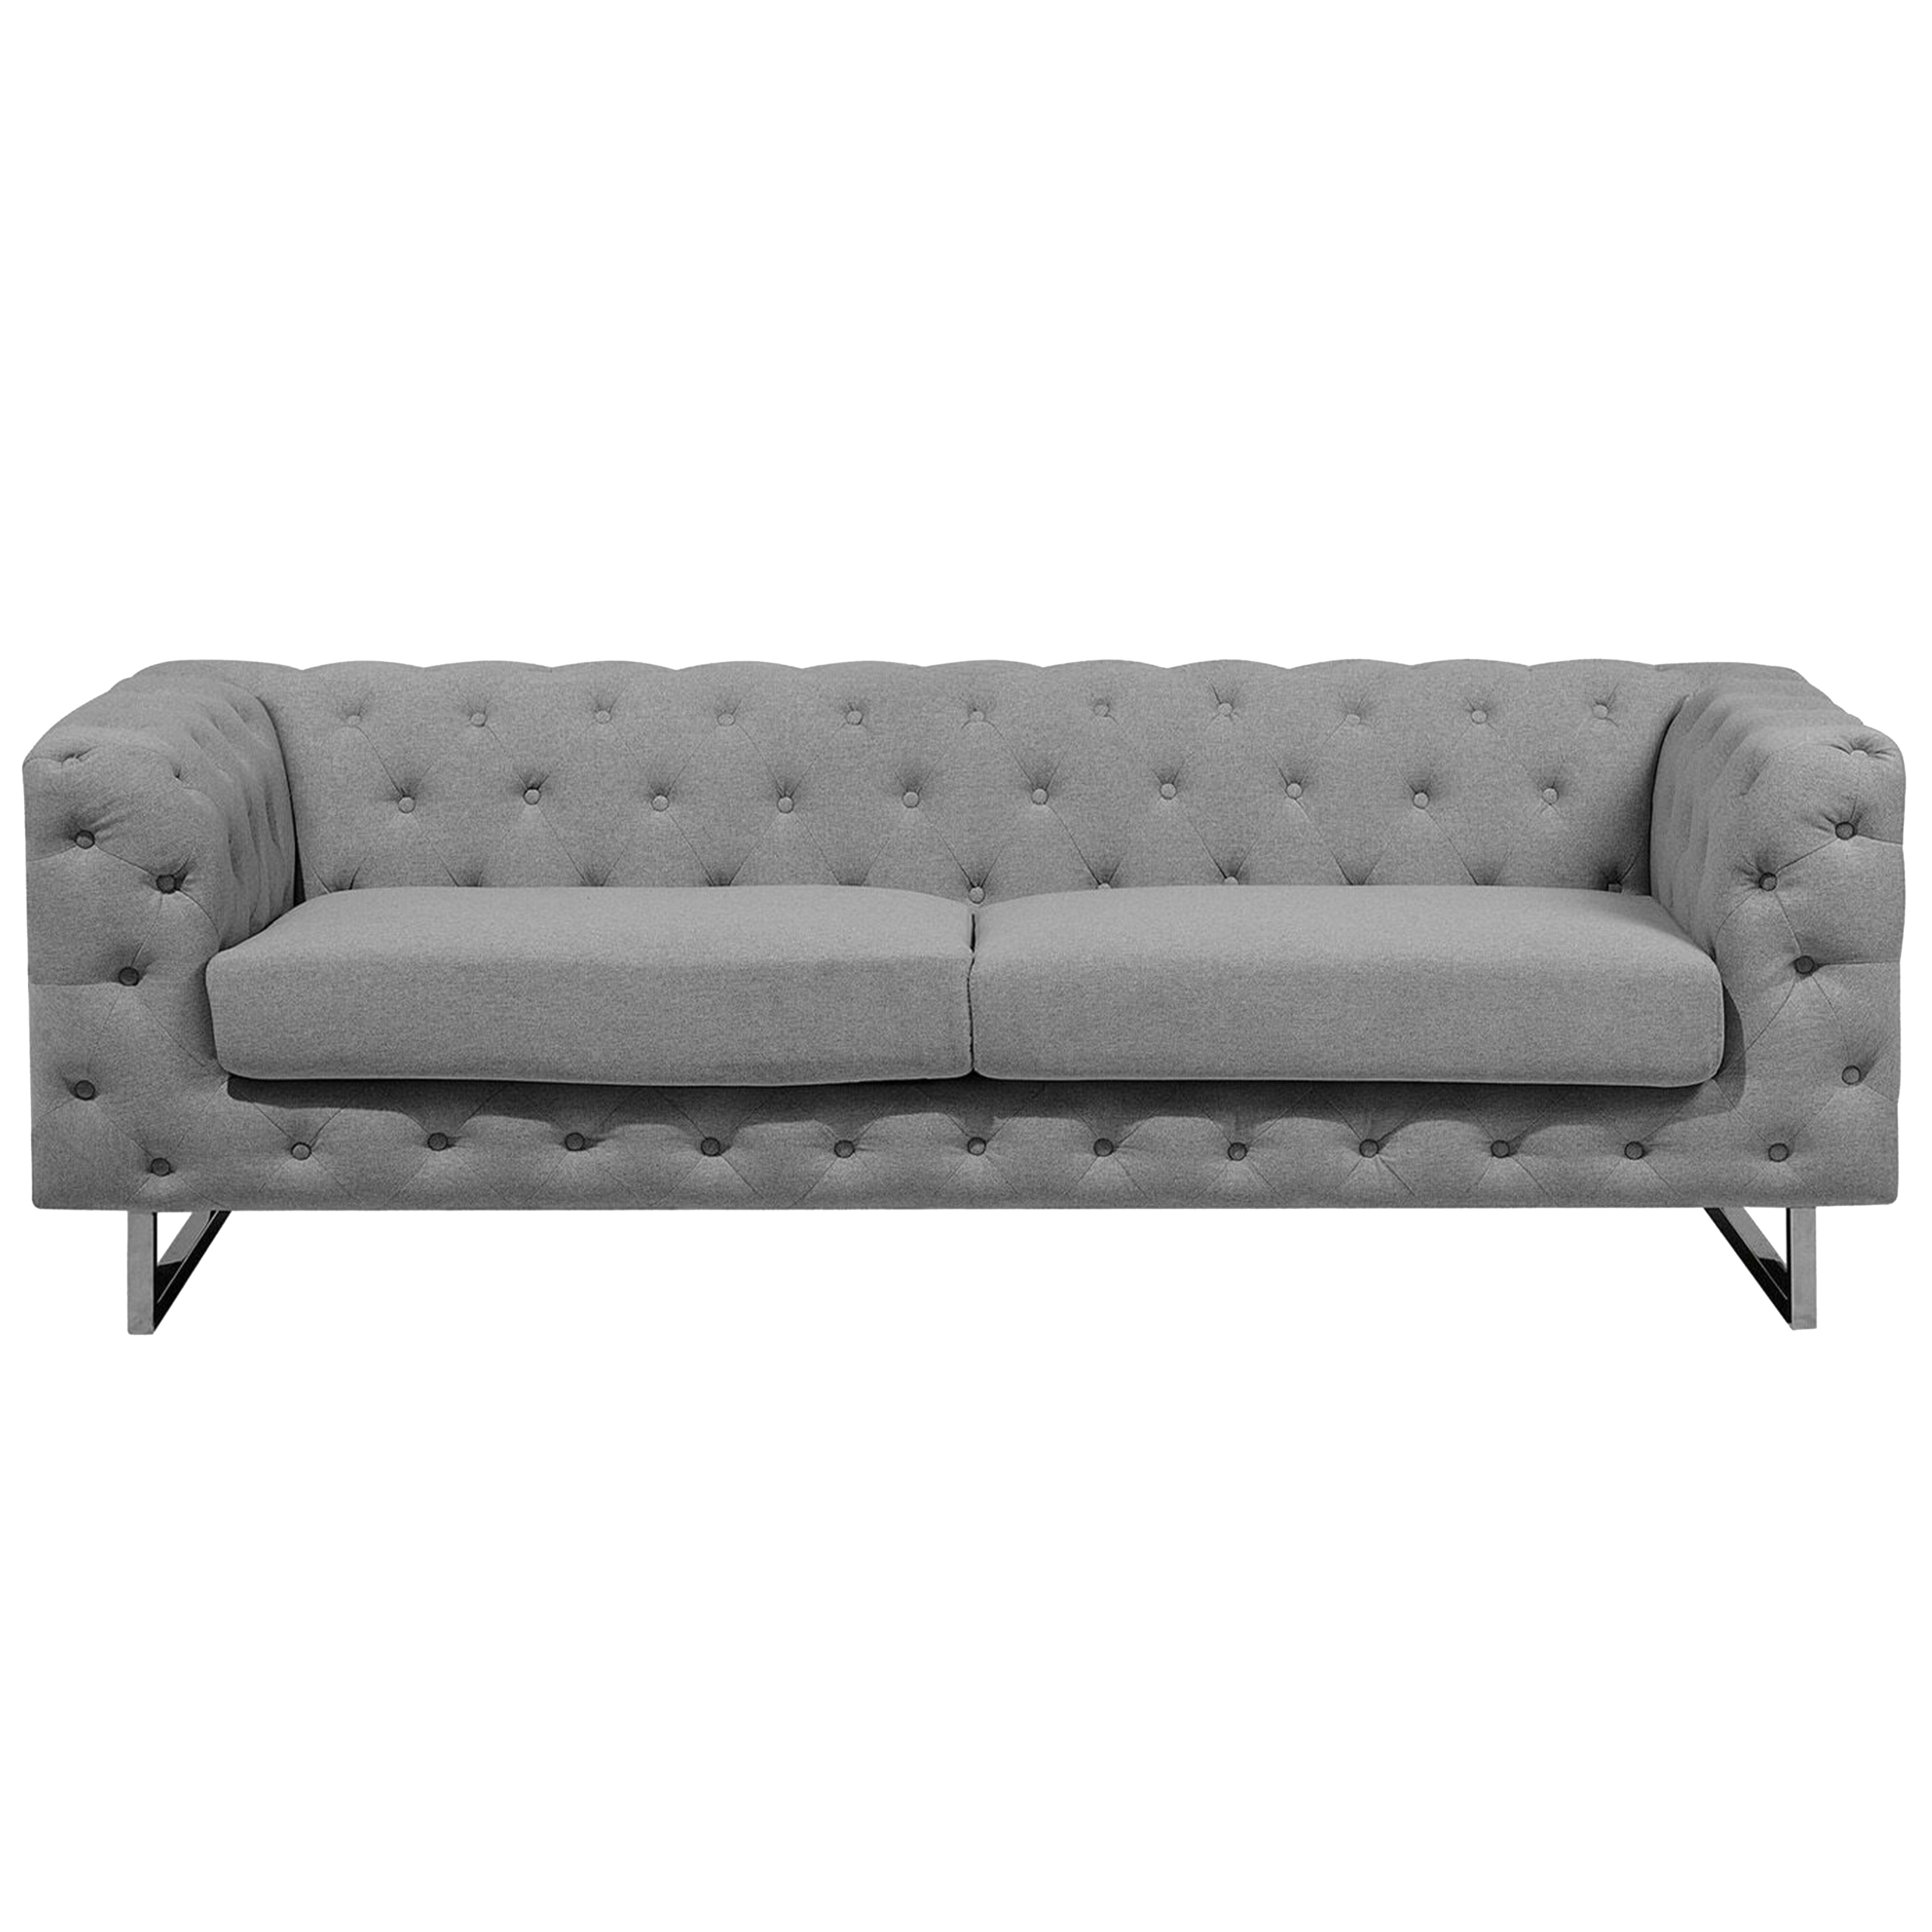 Beliani 3 Seater Chesterfield Sofa Light Grey Button Tufted